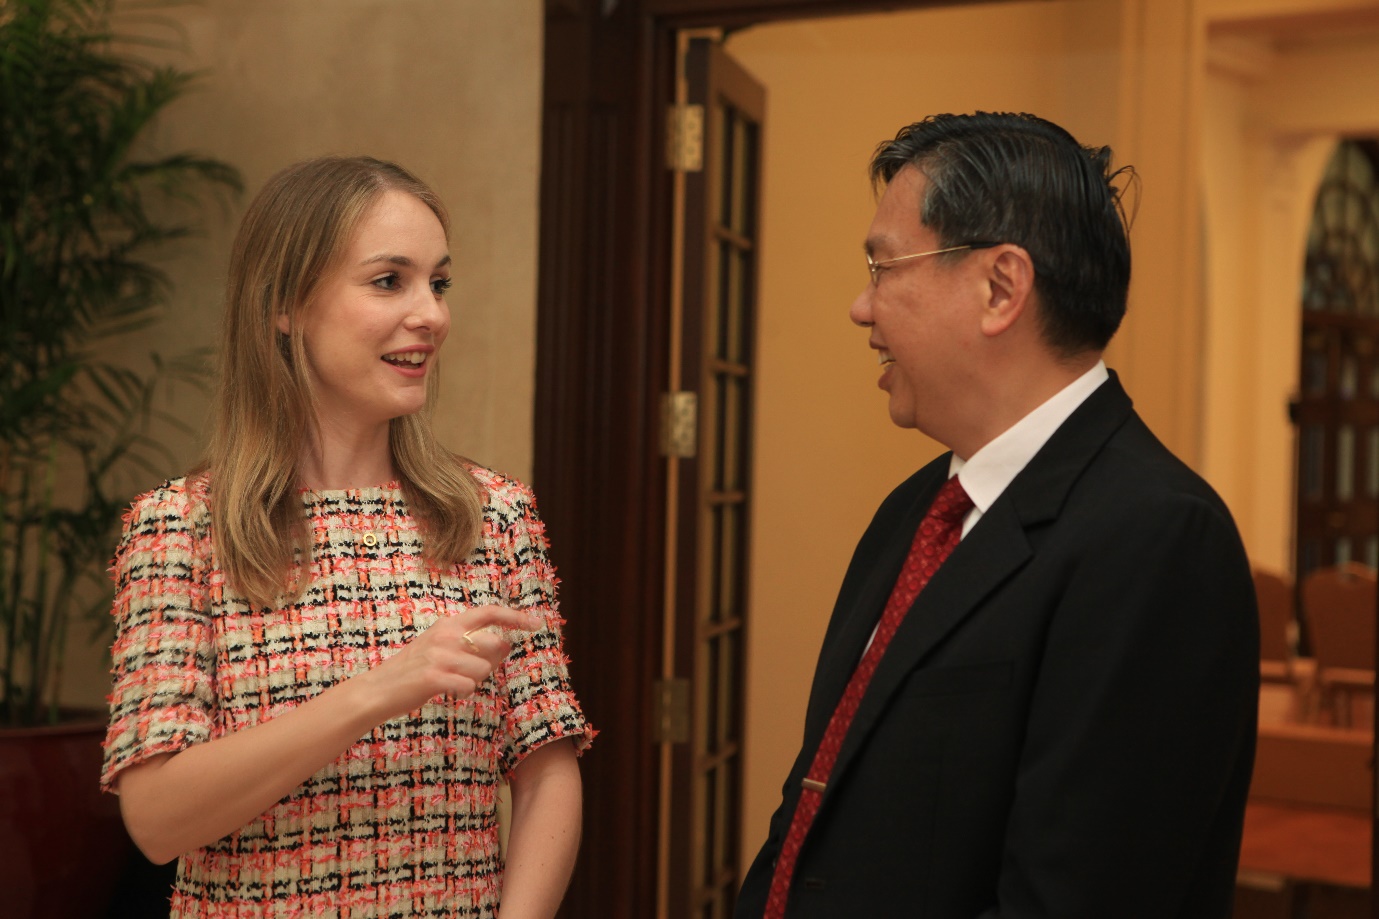 Ms Kate Tyrrell, PFD 2018 participant from Ireland, having an informal discussion with Mr Chee Wee Kiong, Permanent Secretary, Ministry of Foreign Affairs, at a tea reception after the Closing Ceremony of PFD 2018 11 May 2018